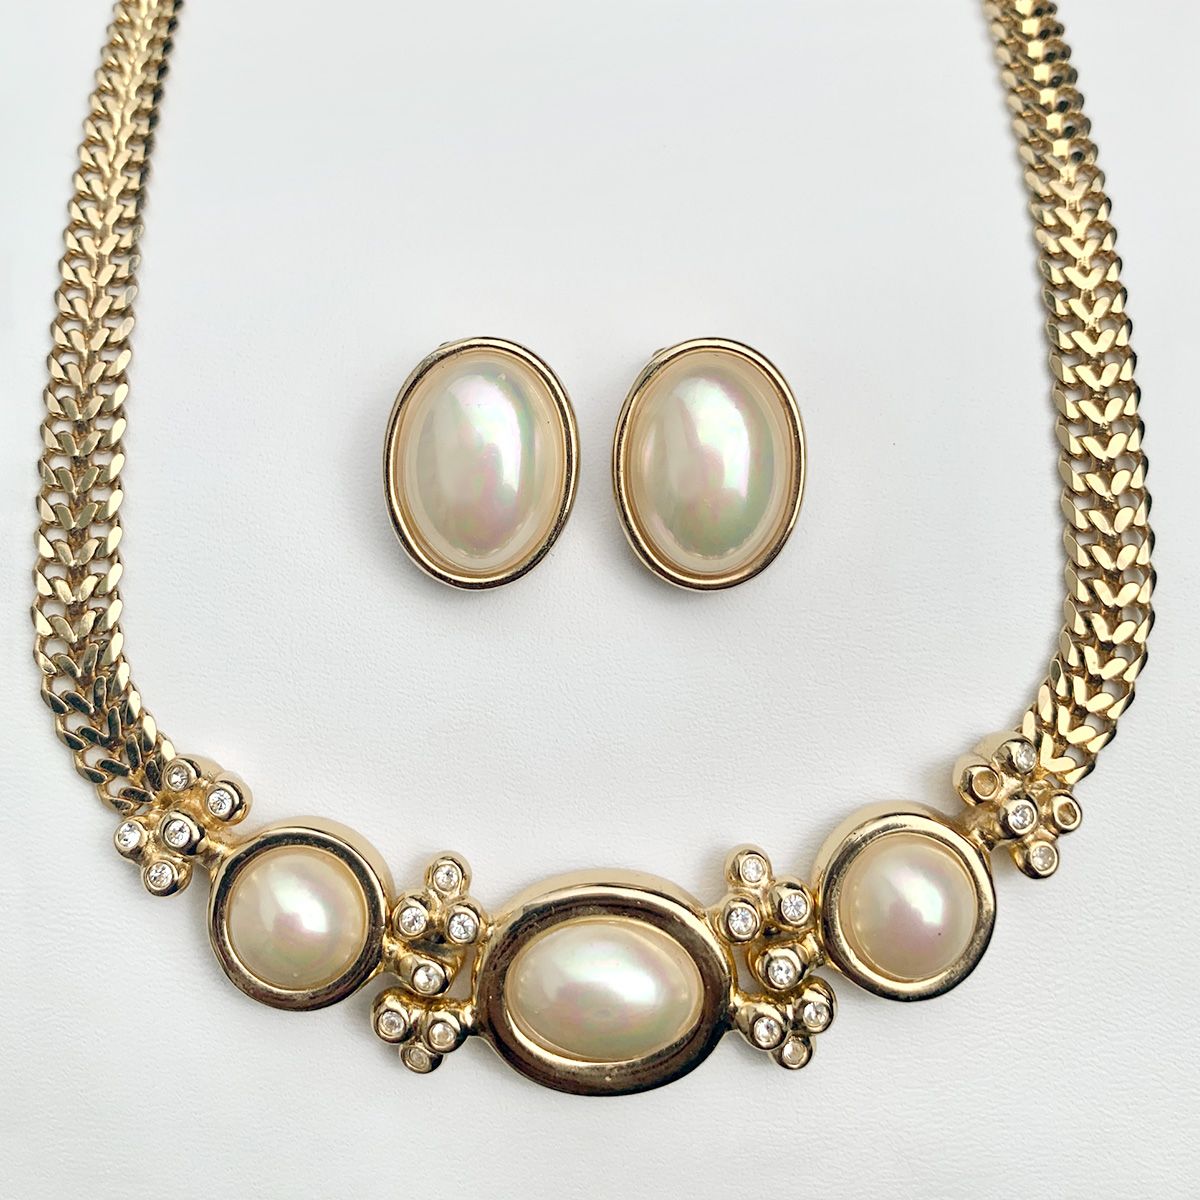 Grosse for Dior pearls and diamante 1